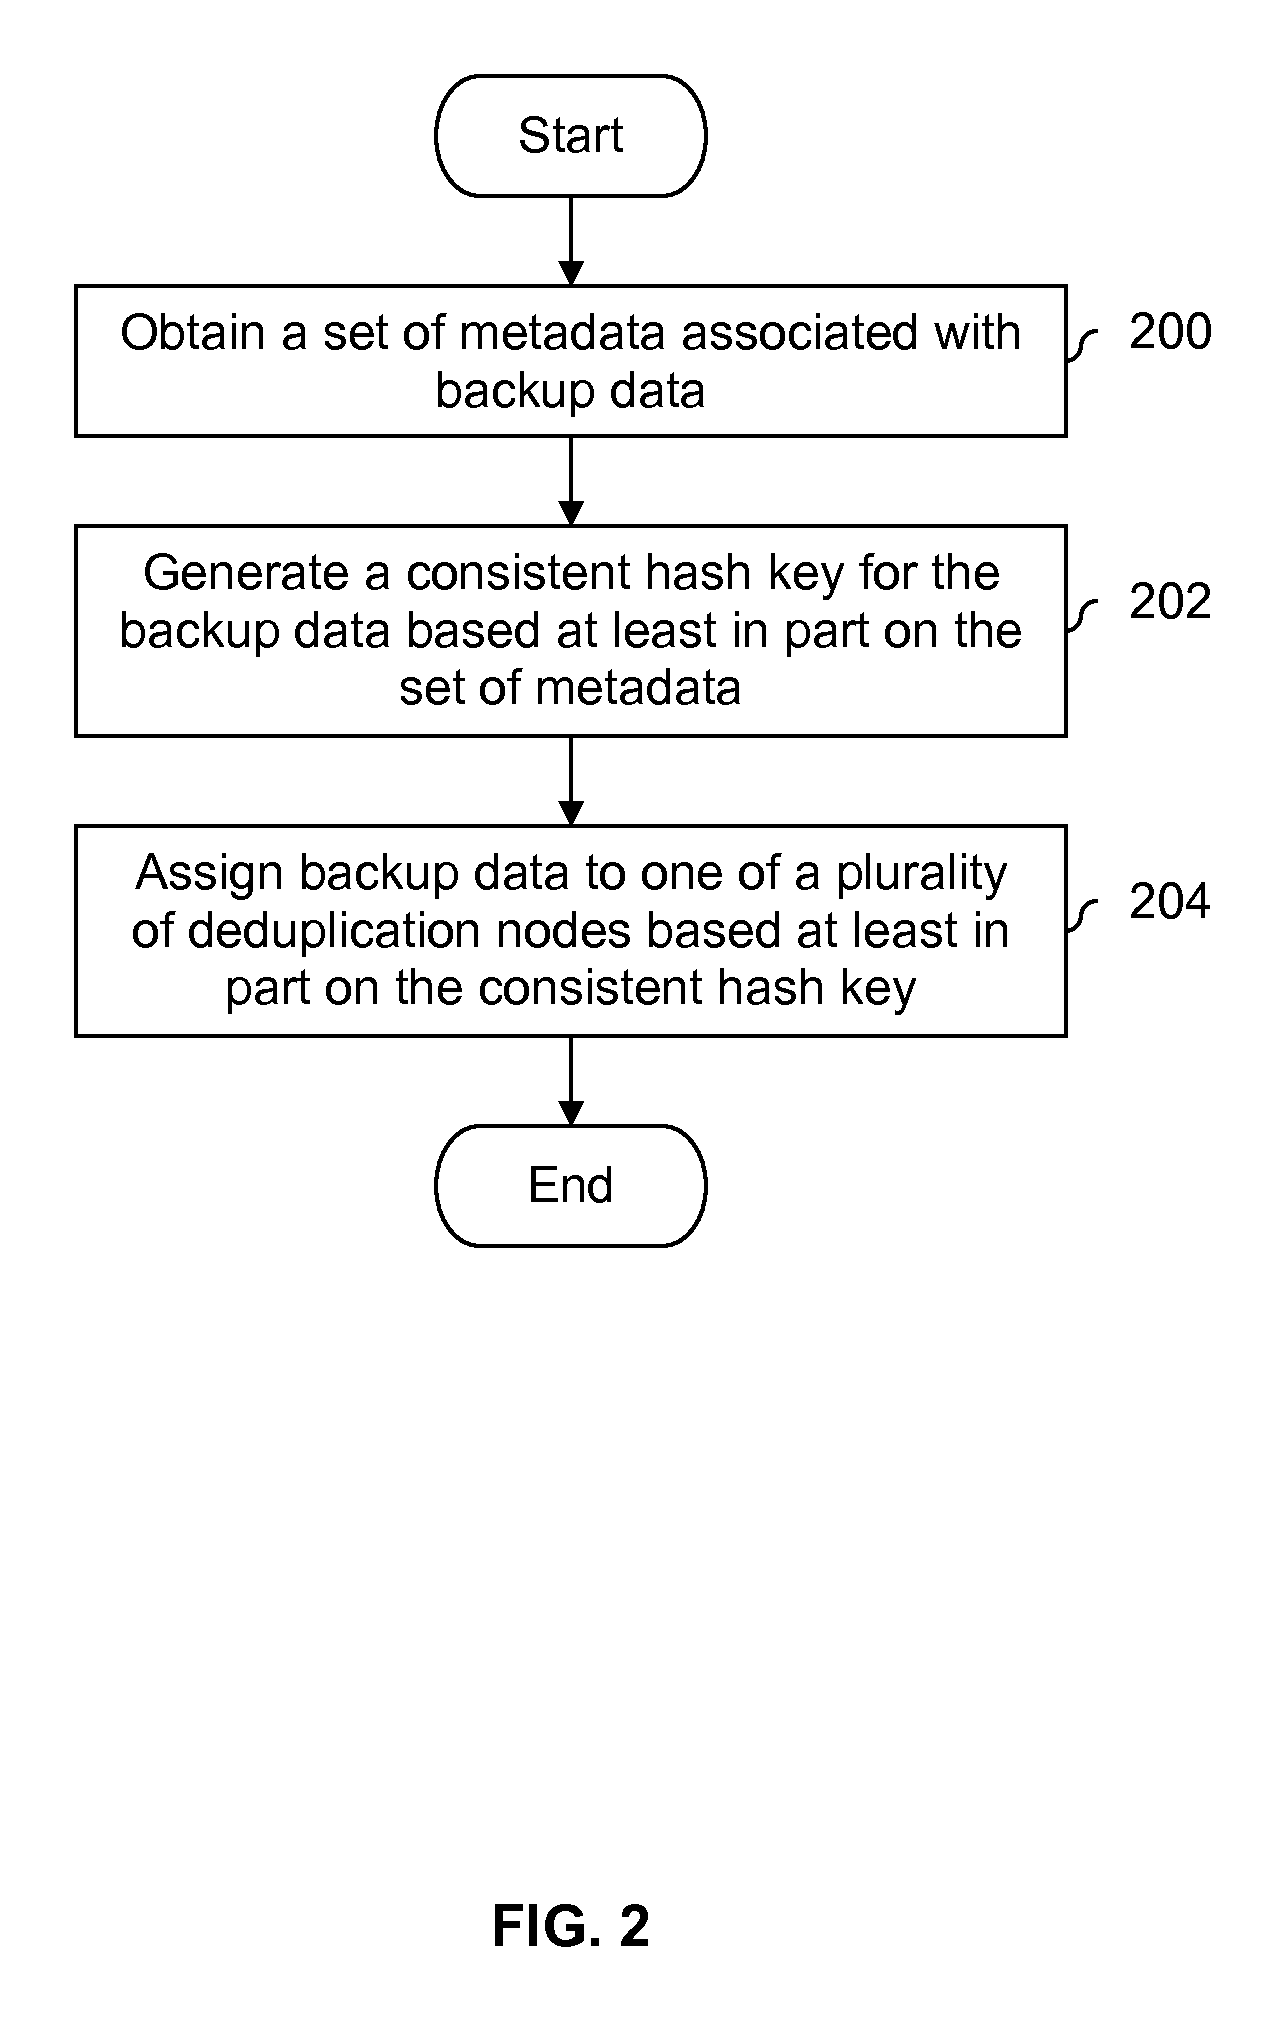 Content-aware distributed deduplicating storage system based on consistent hashing